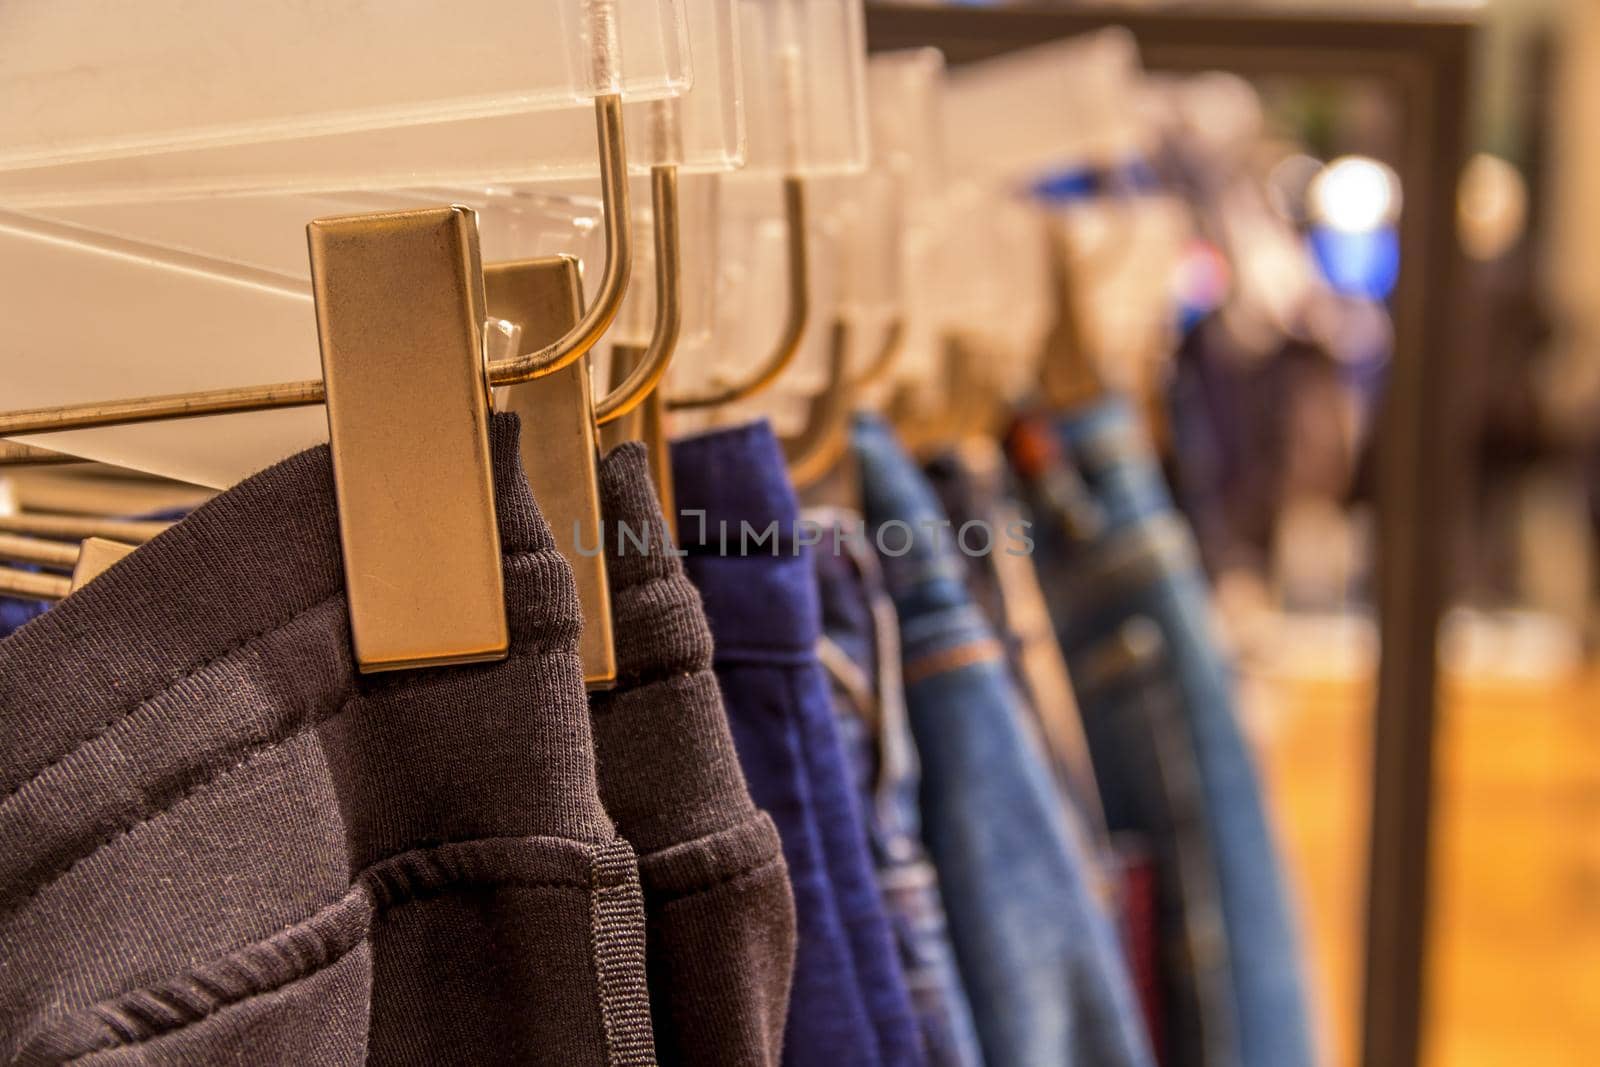 pants clips in a clothing store